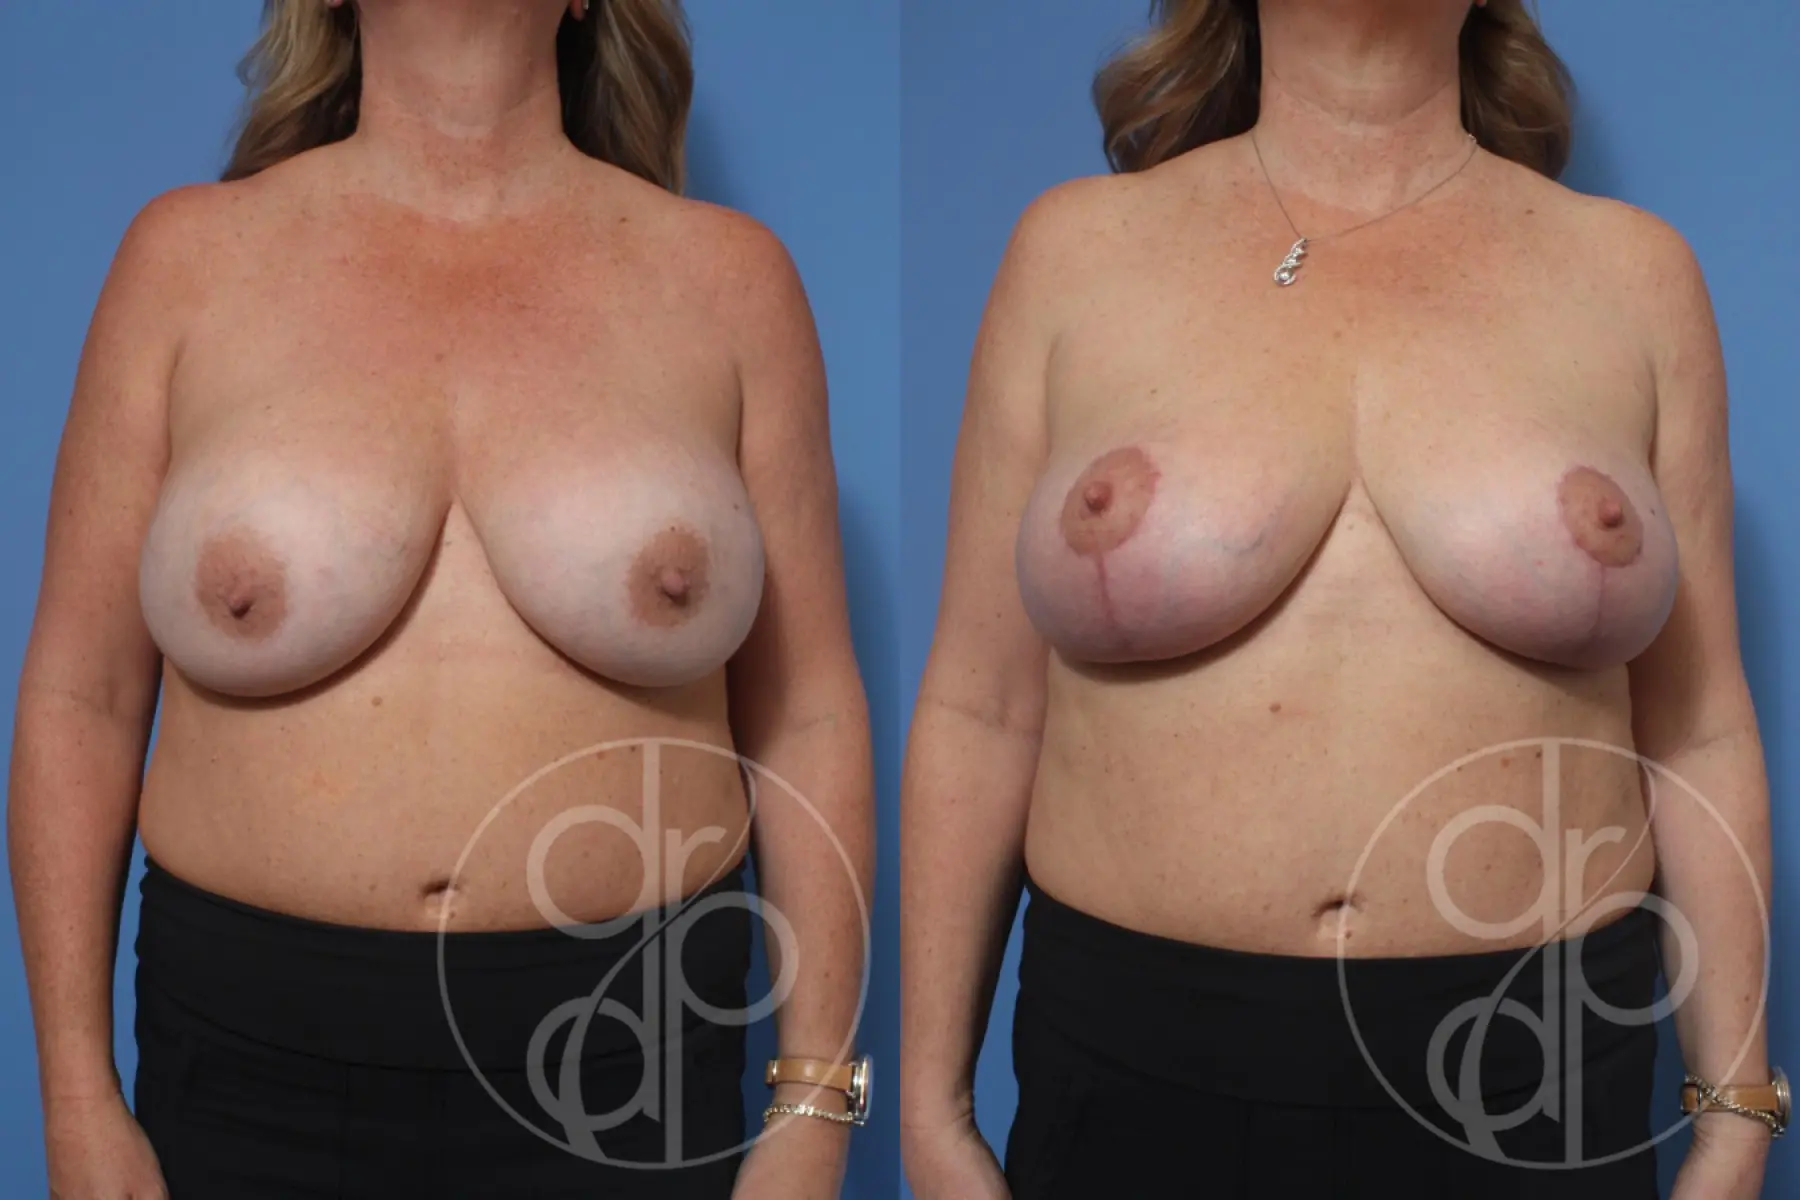 patient 10492 remove and replace breast implants before and after result - Before and After 1